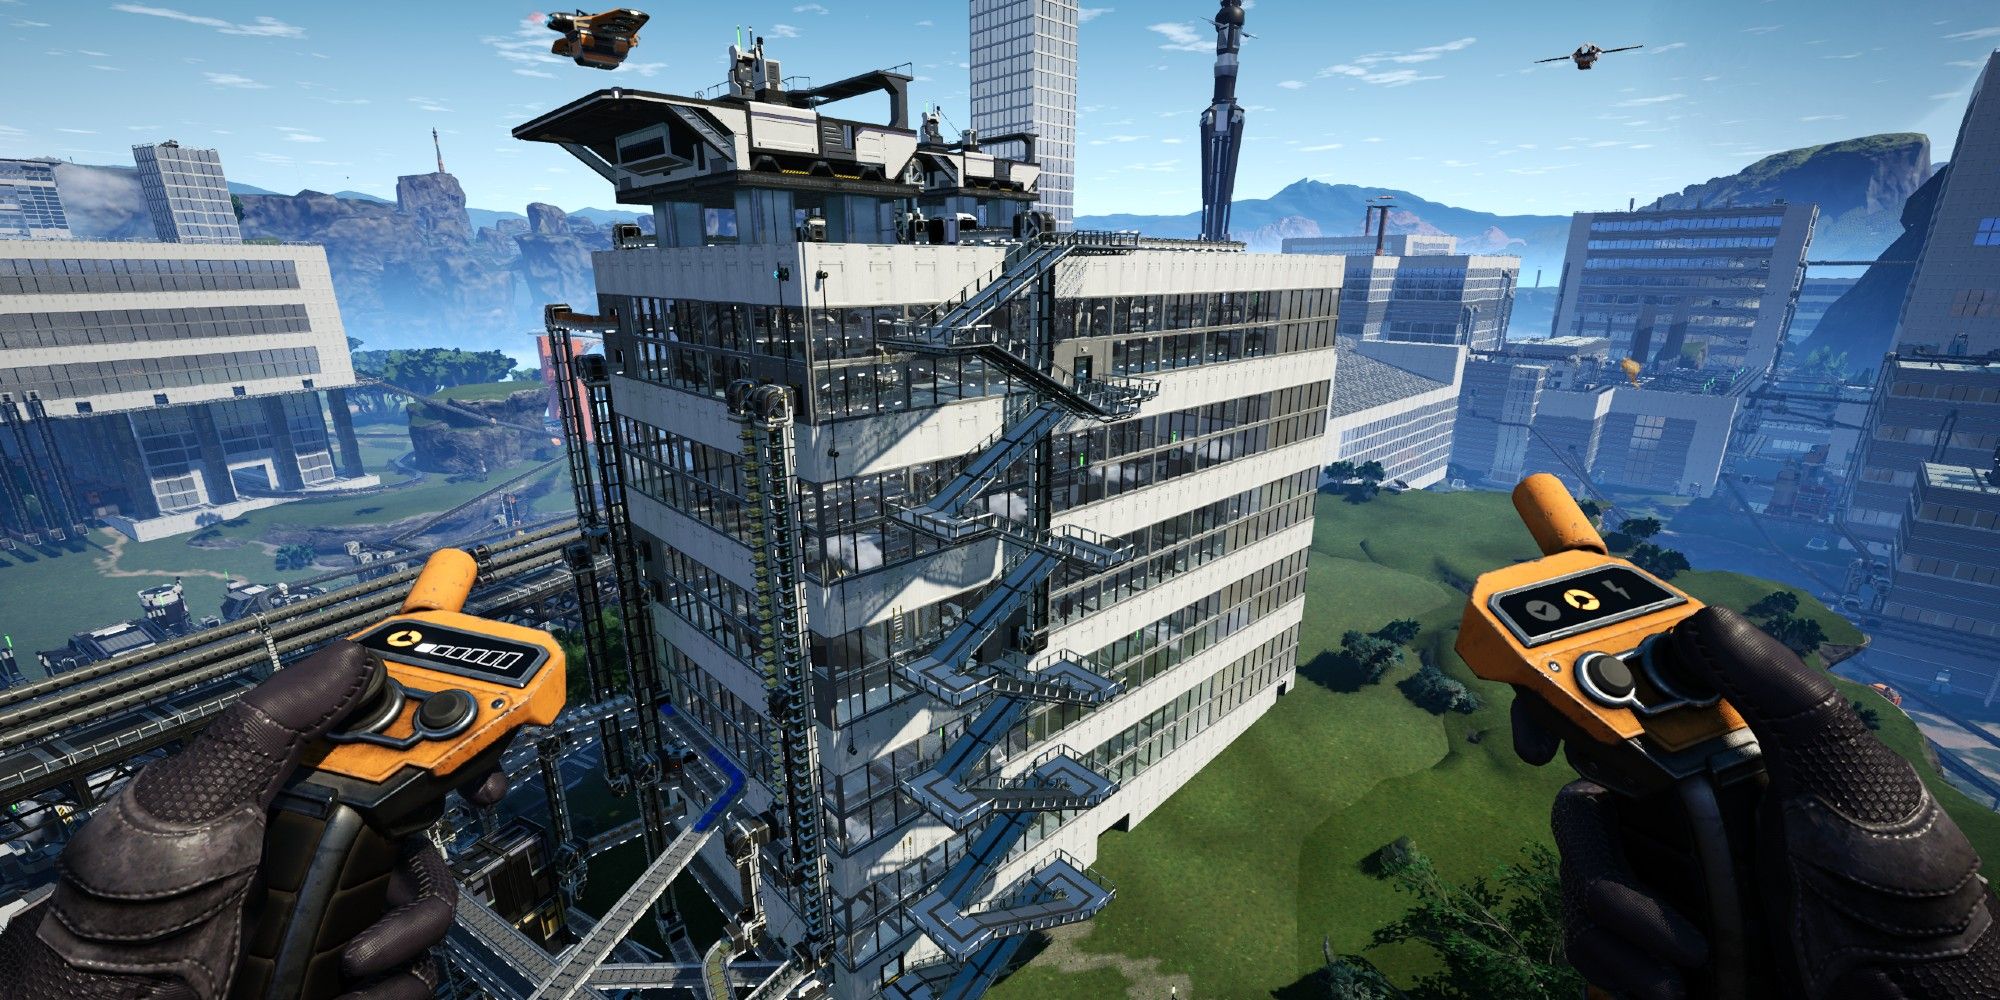 A player uses Drones to move resources around the map in Satisfactory